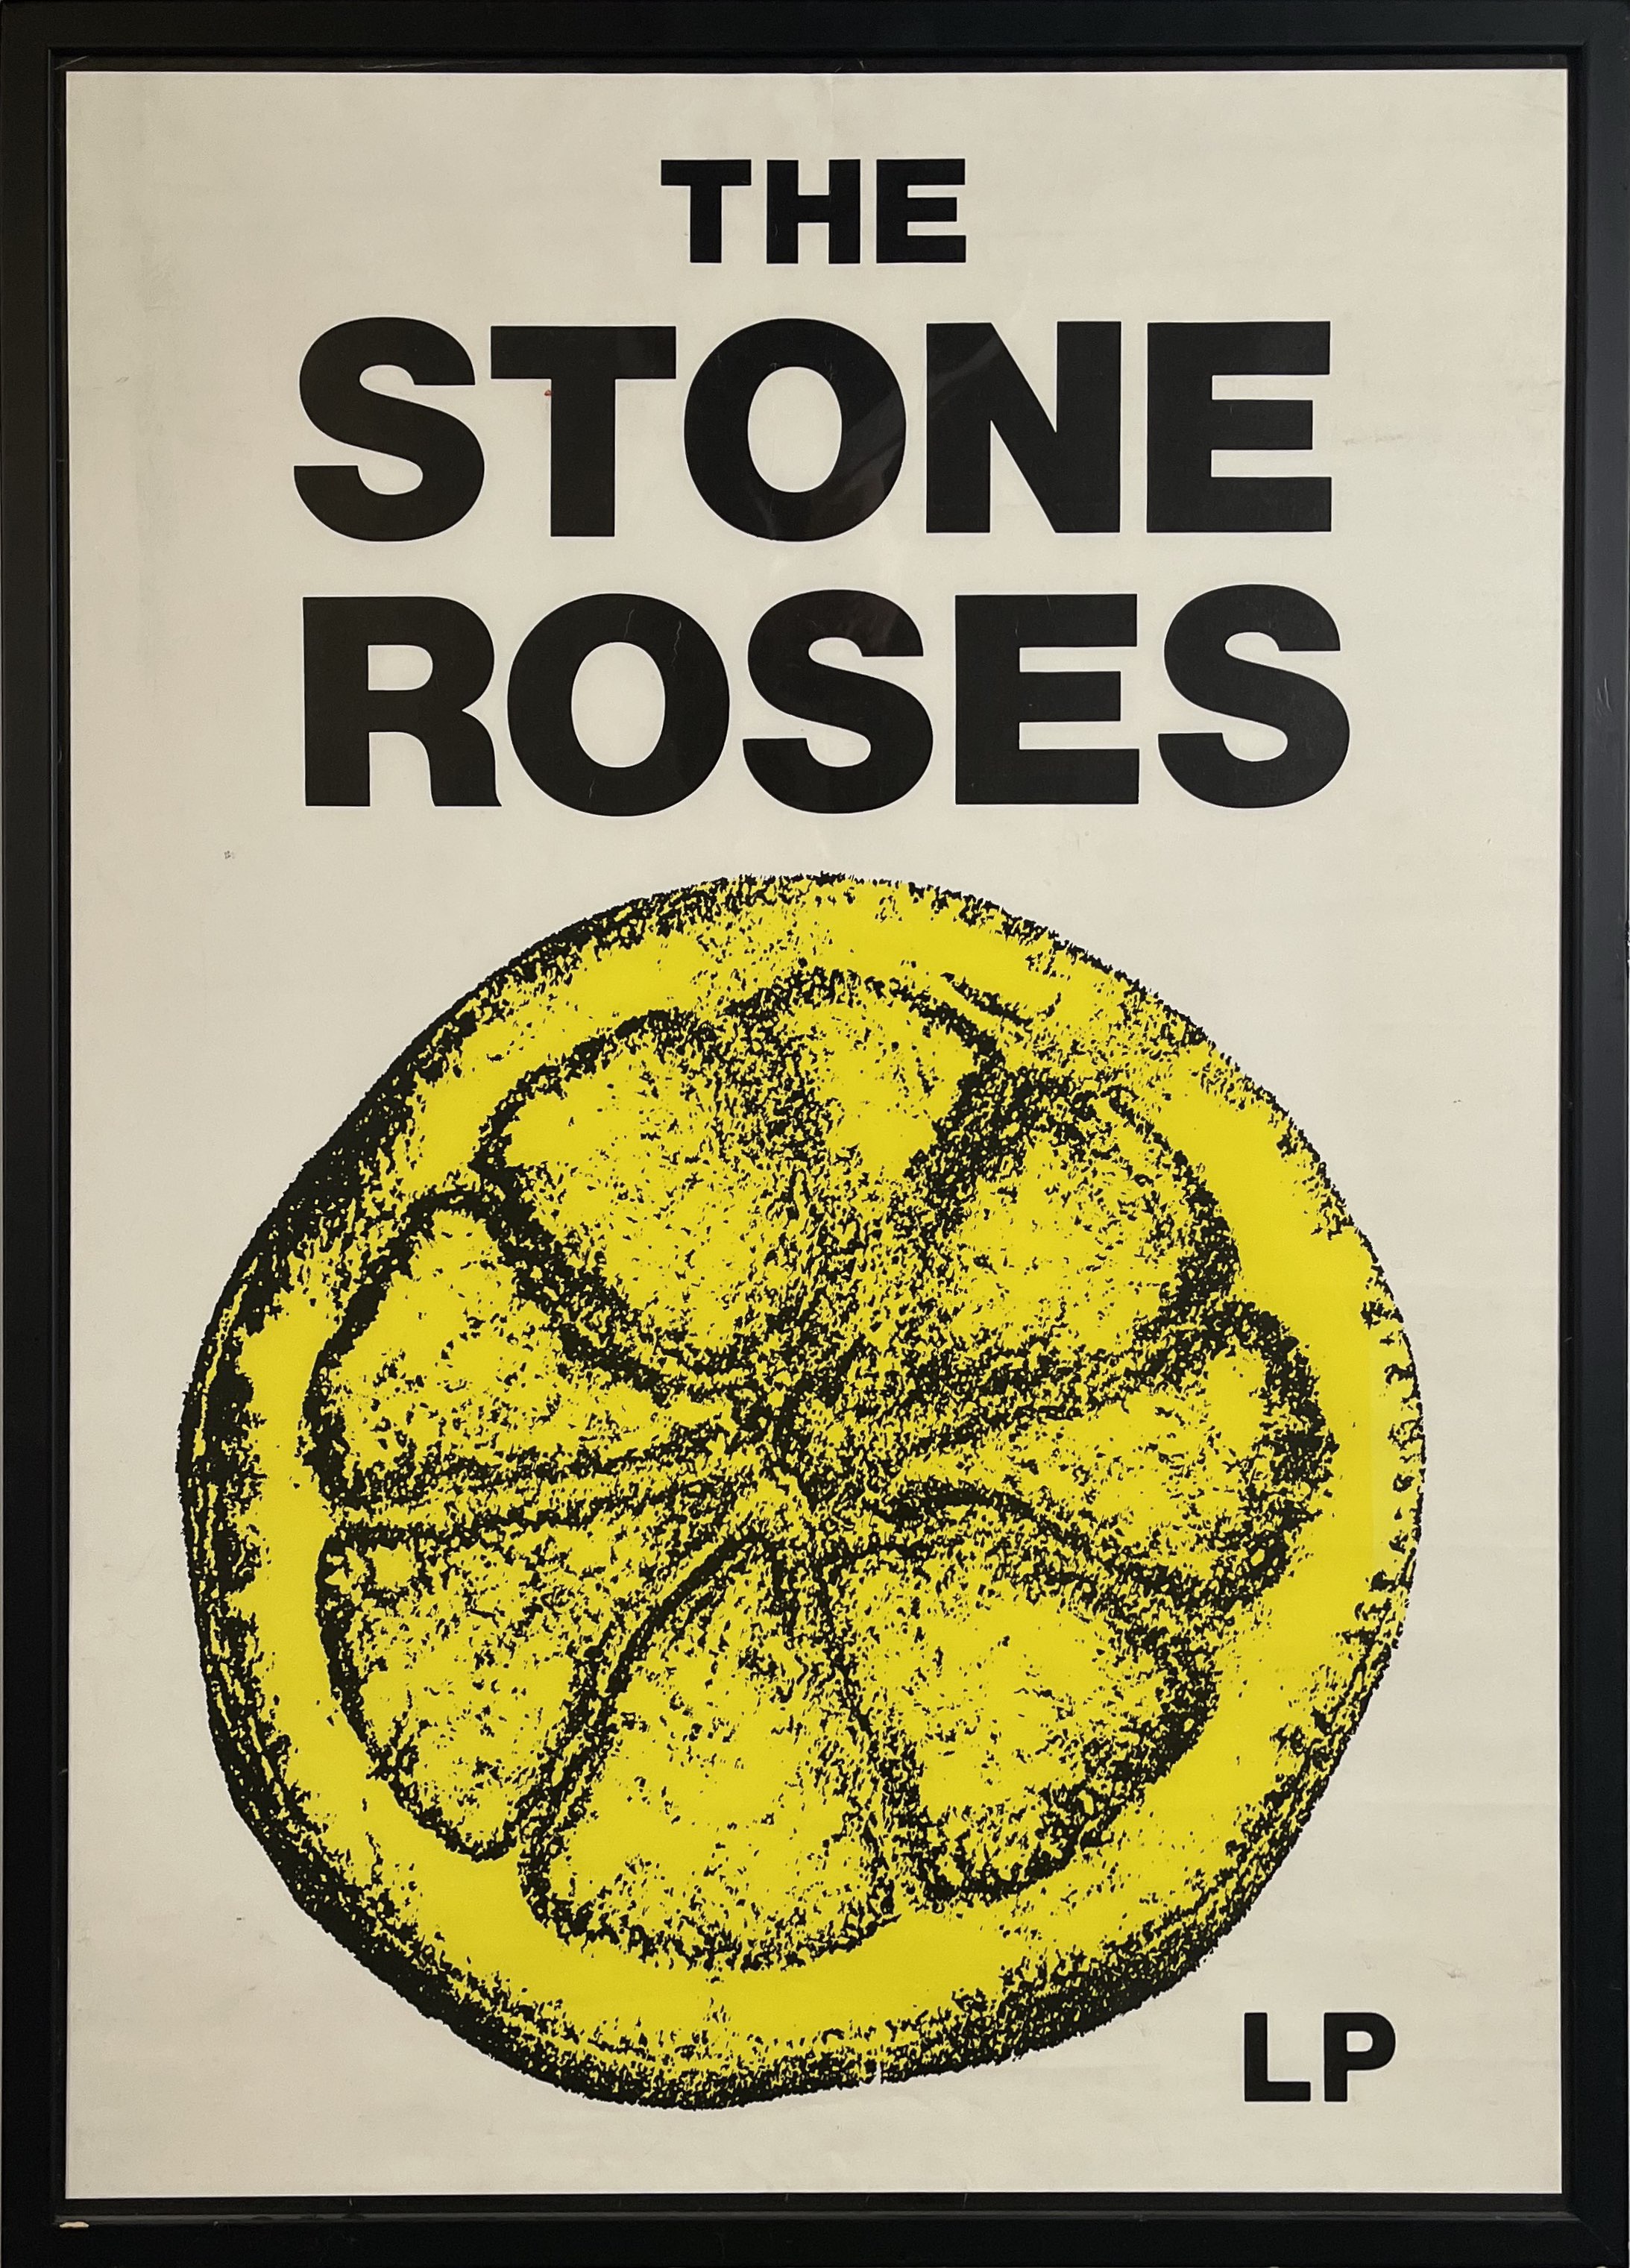 Lot 169 - THE STONE ROSES - AN ORIGINAL PROMOTIONAL